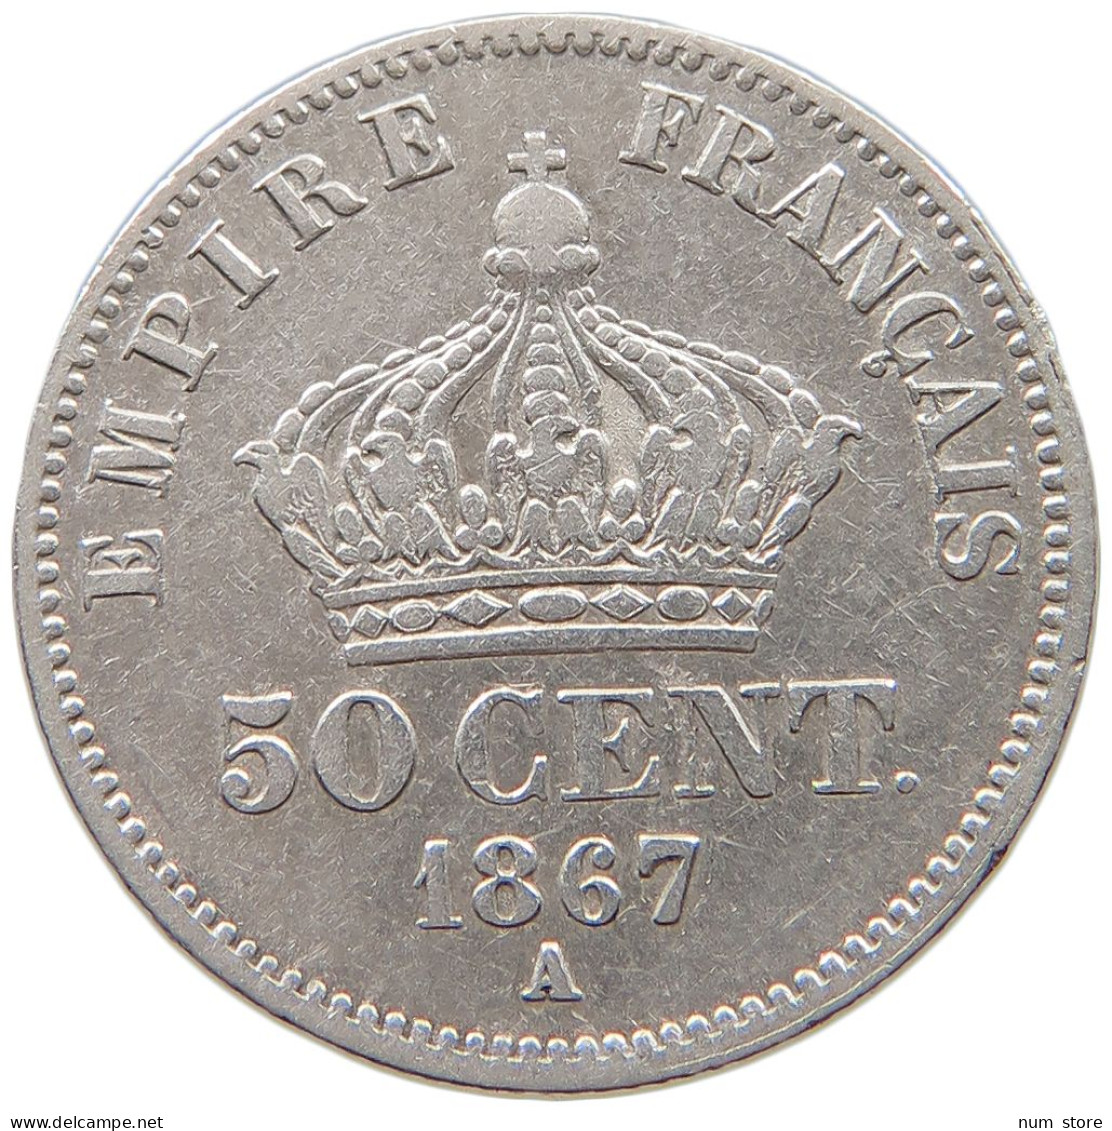 FRANCE 50 CENTIMES 1867 A Napoleon III. (1852-1870) #c052 0229 - 50 Centimes